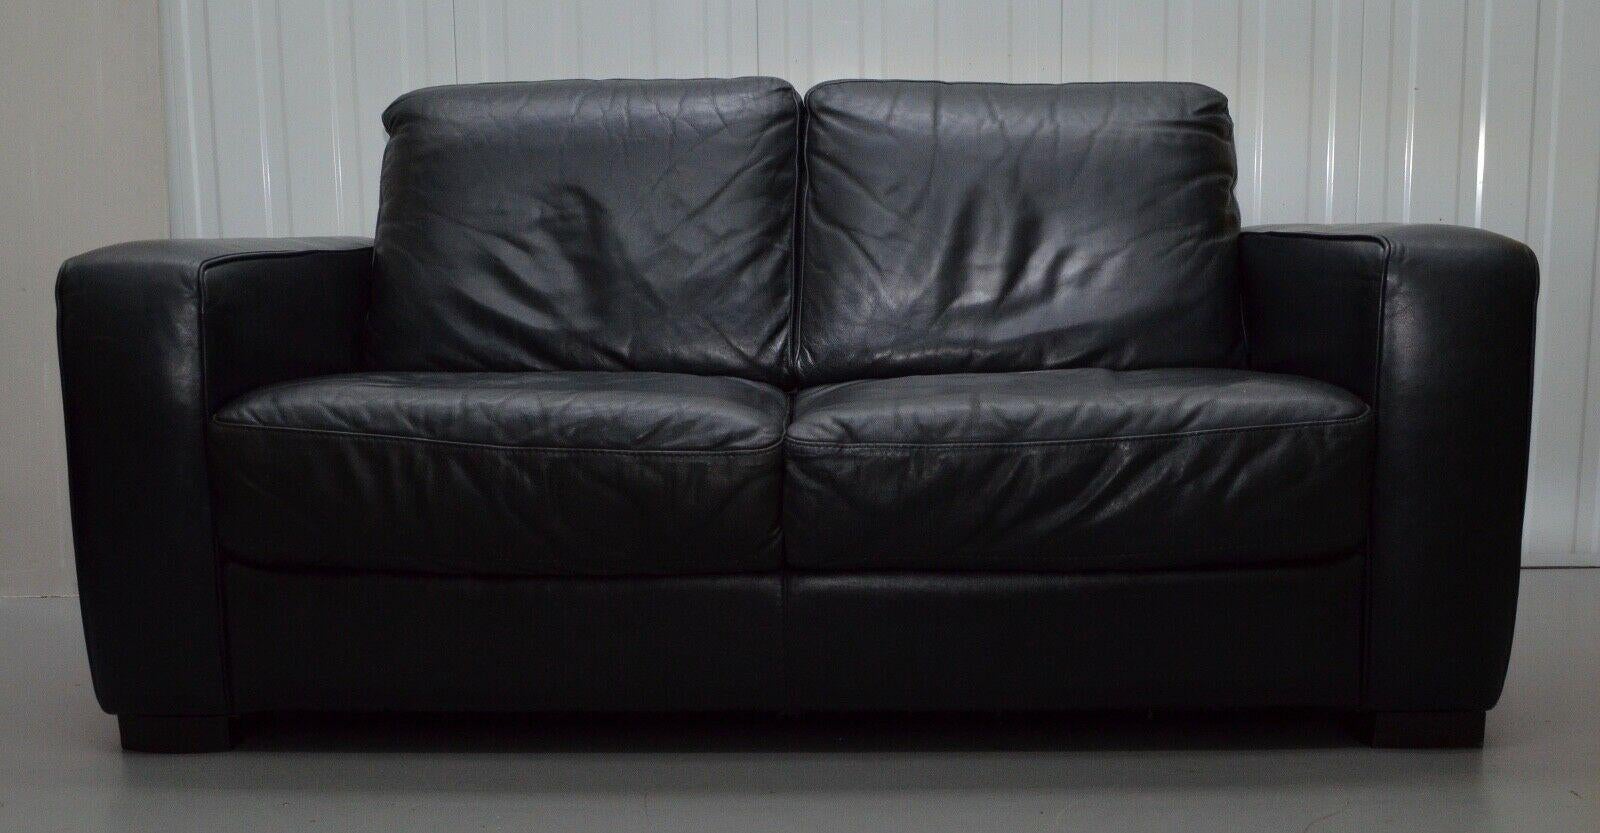 Art Deco 1 of 2 FINE NATUZZI BLACK LEATHER TWO SEATER SOFAS MATCING ARMCHAIR AVAILABLE For Sale